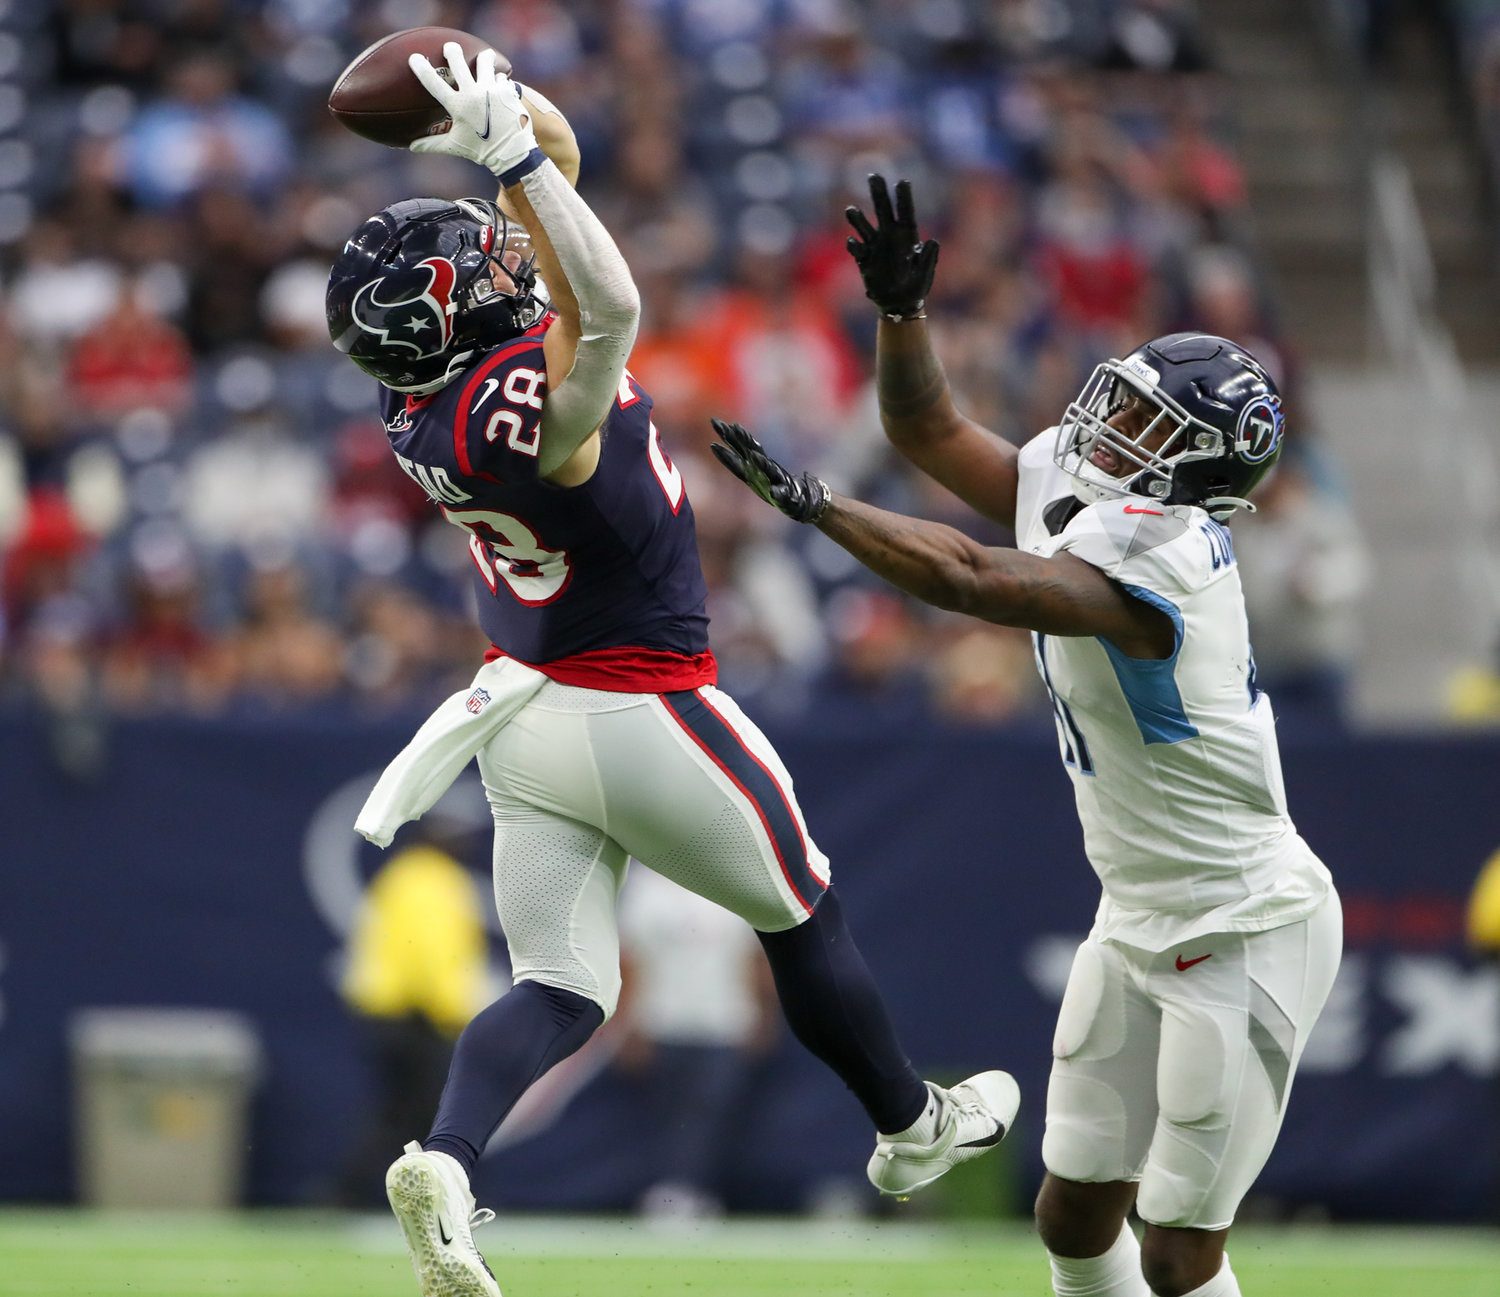 Houston Texans running back Rex Burkhead (28) brings in a pass for a first down during an NFL game between the Texans and the Titans on Jan. 9, 2022 in Houston, Texas. The Titans won, 28-25.